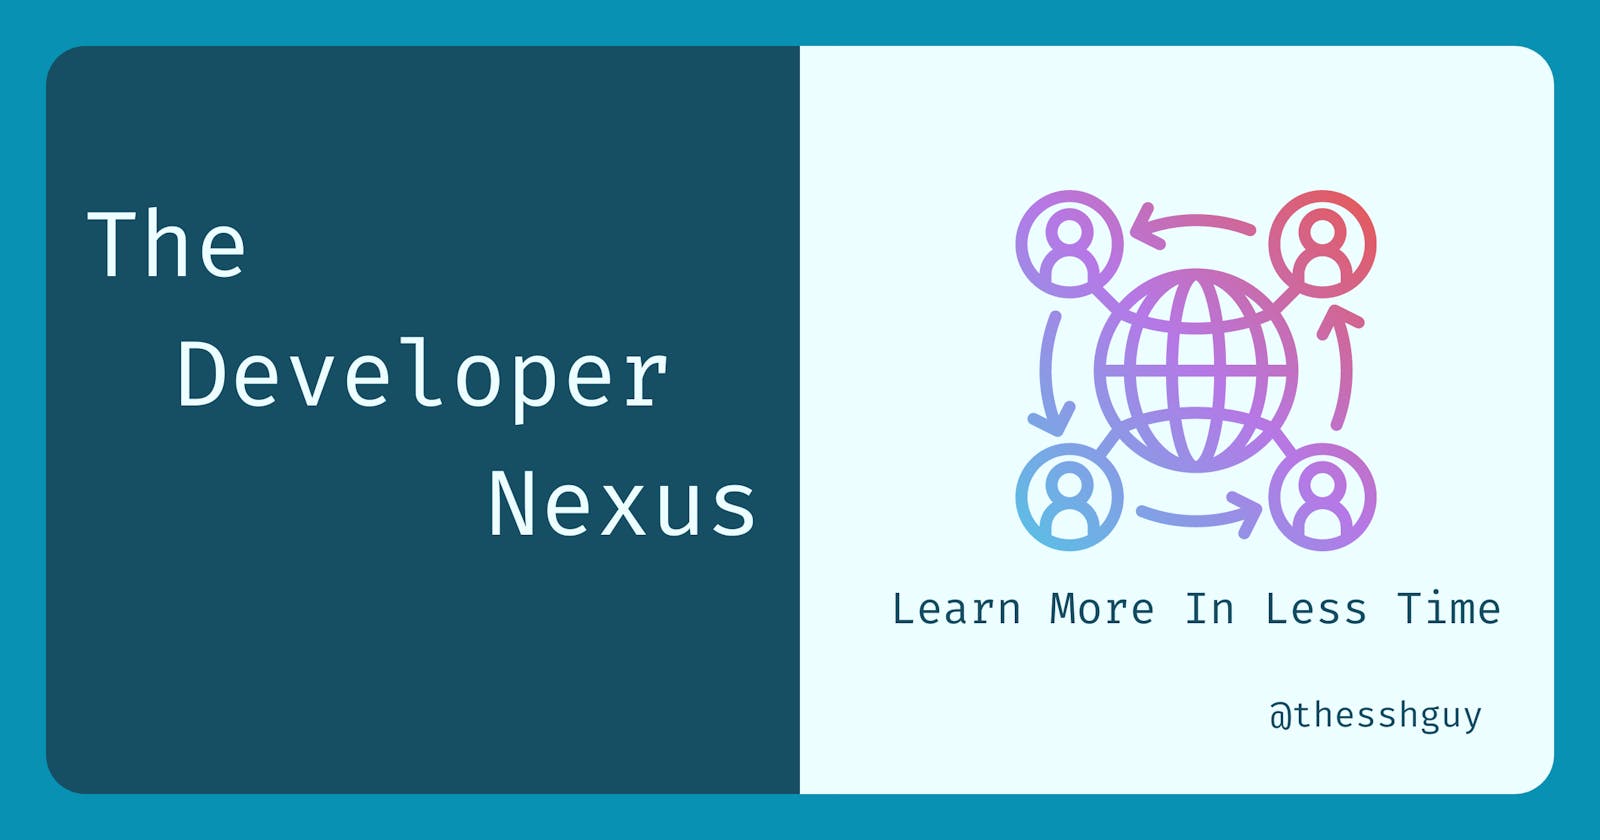 The Developer Nexus: How Online Communities Help You Learn More In Less Time From Direct Sources